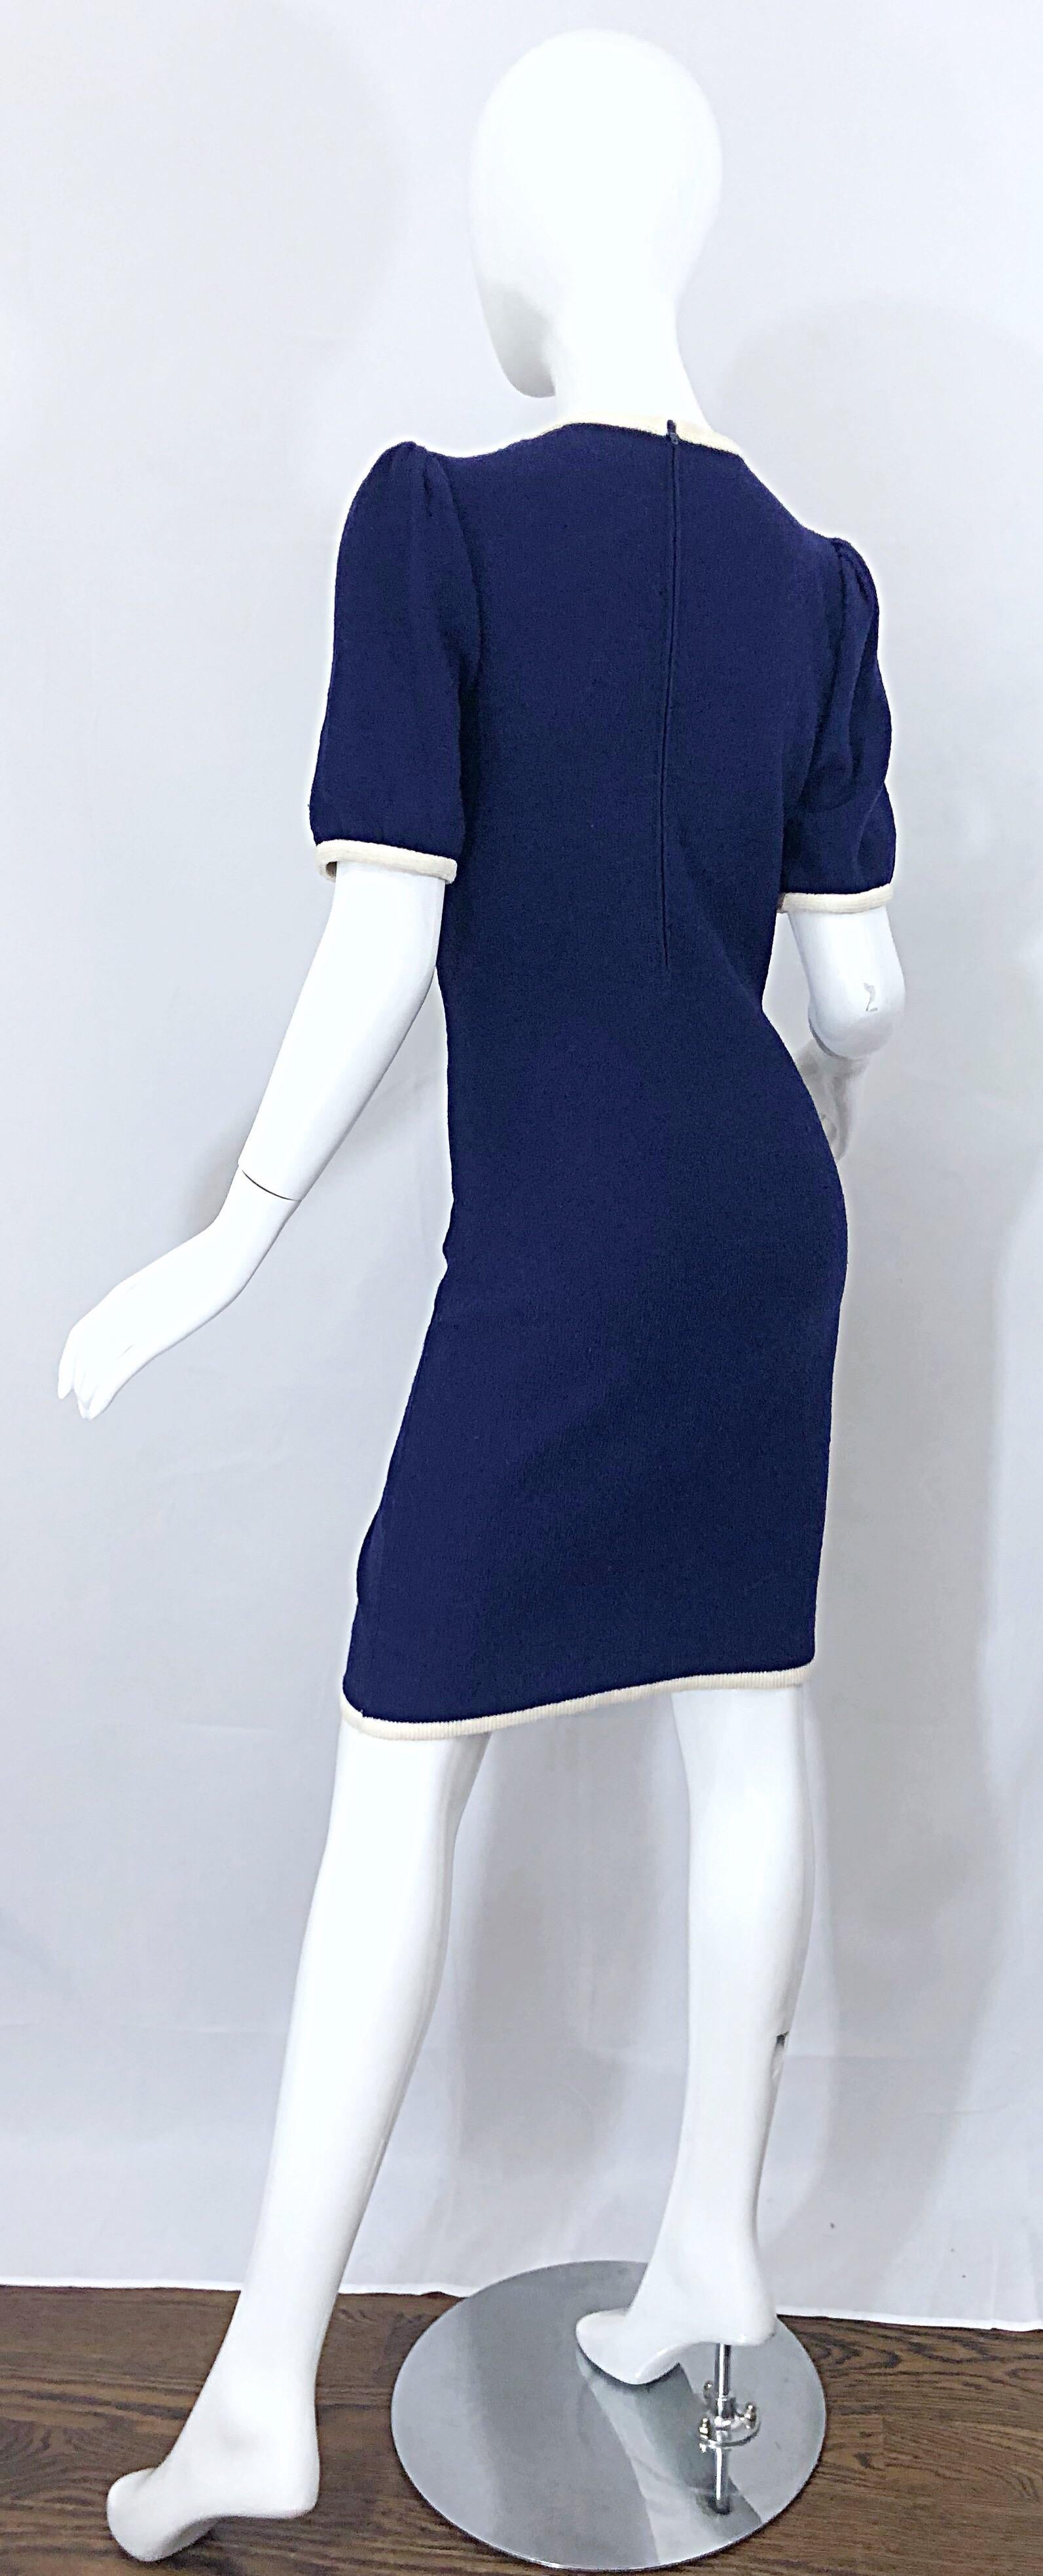 Vintage Adolfo for Saks 5th Avenue Navy Blue and White Nautical Knit Dress 8